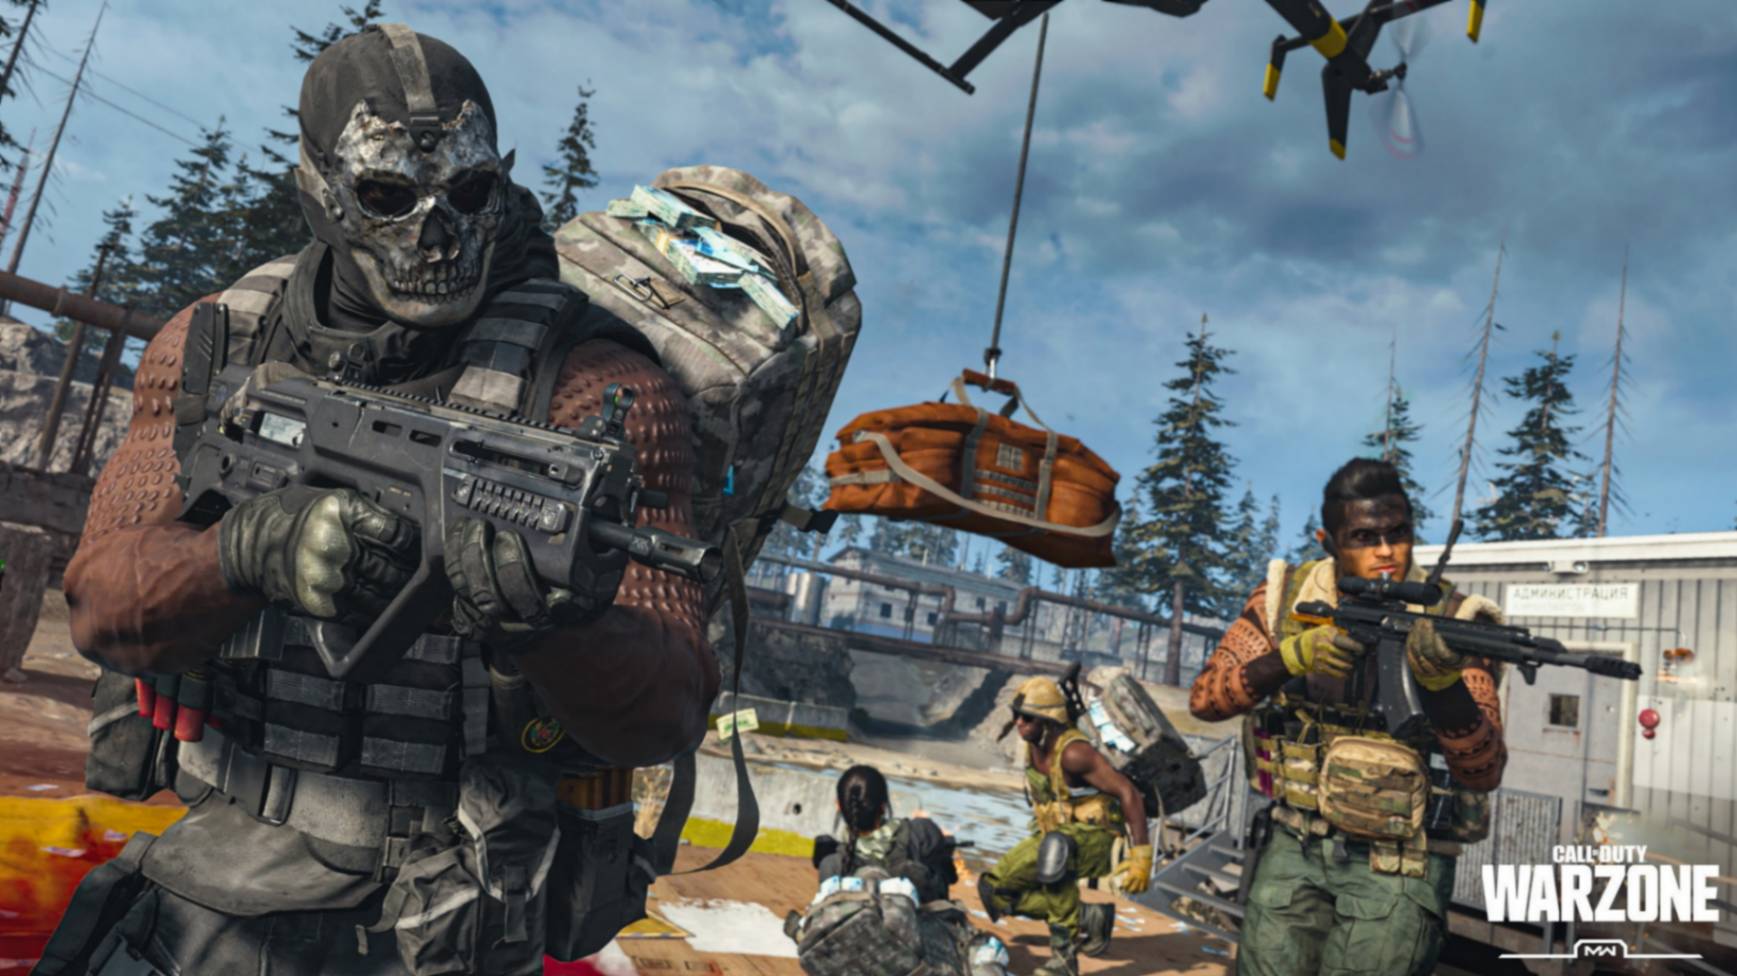 Microsoft-Sony 10-Year Agreement Will Keep Call of Duty Games on the PlayStation platforms.